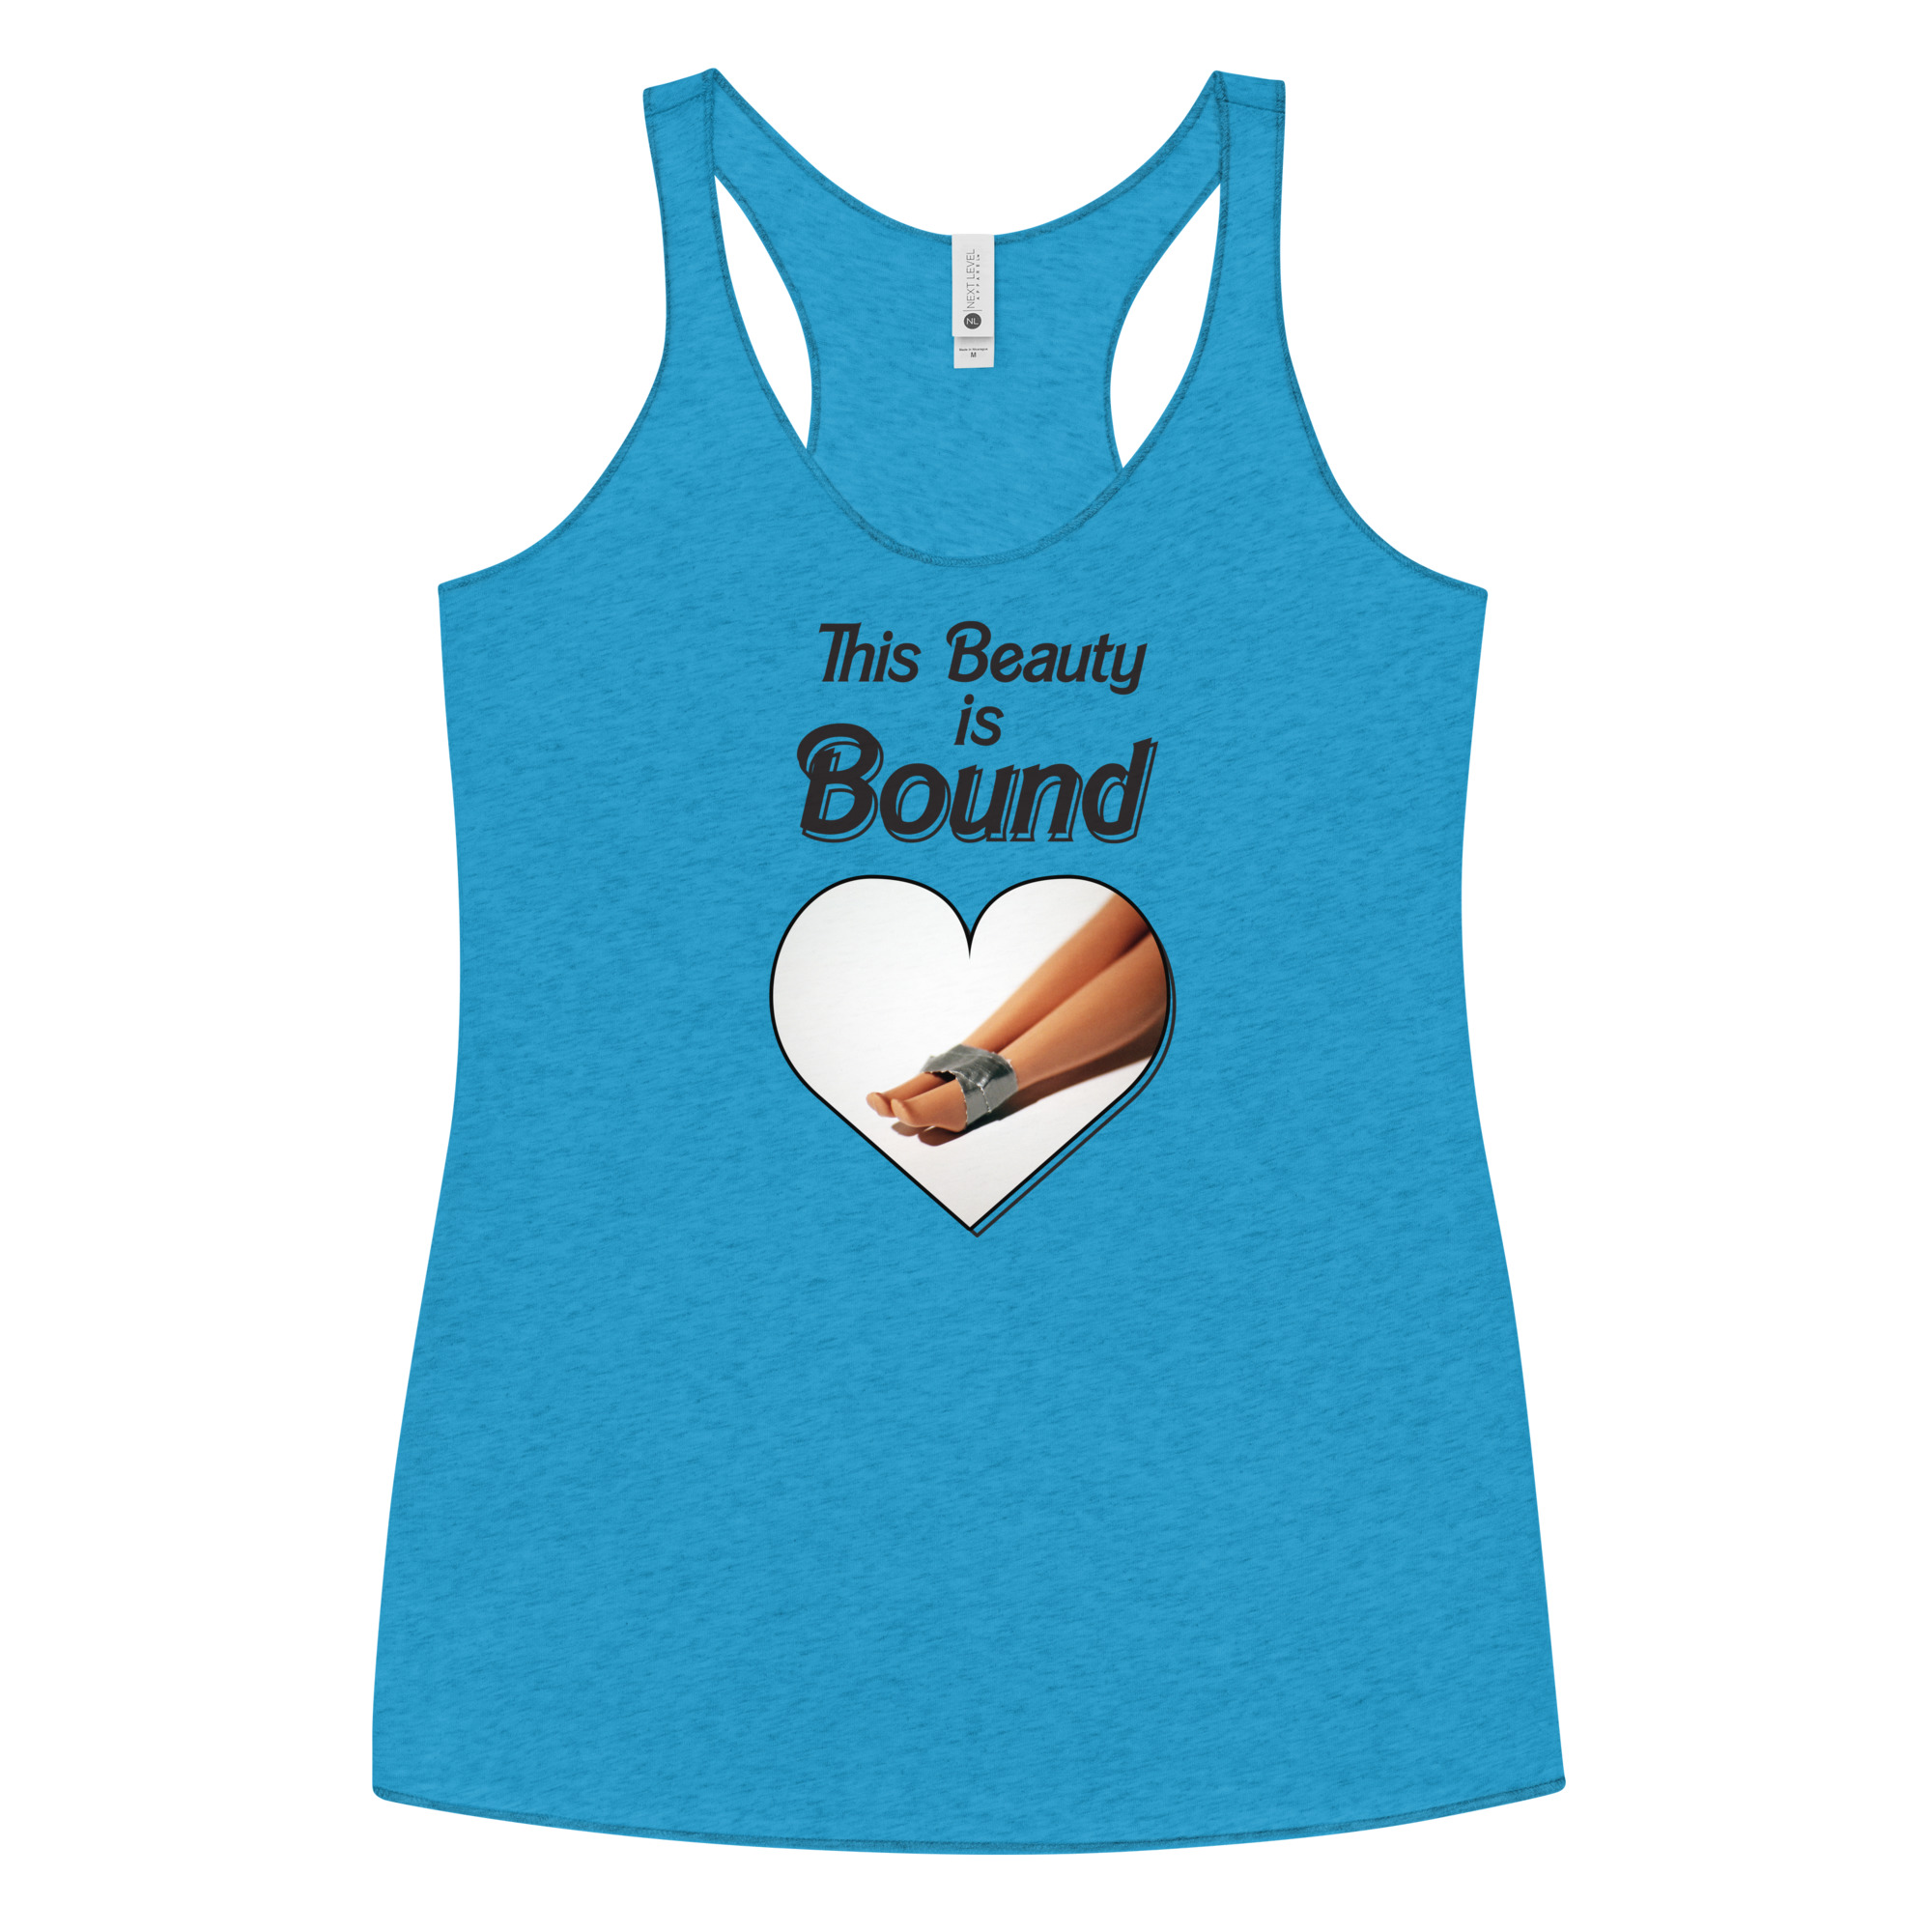 This Beauty is Bound Tank Top by Wilde Designs